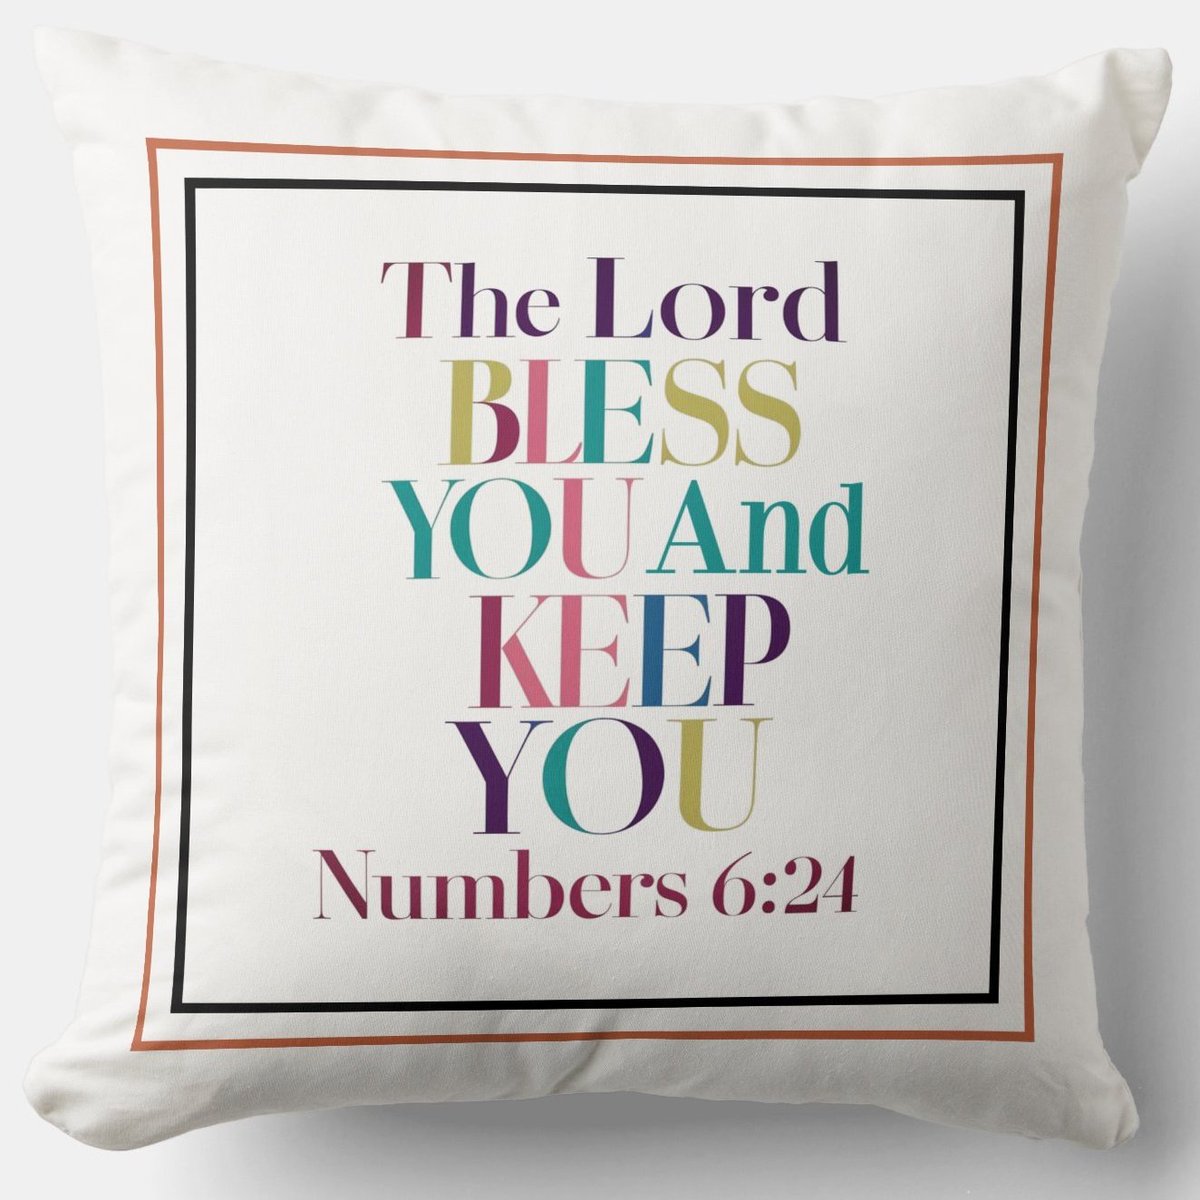 The Lord Bless You And Keep You  zazzle.com/the_lord_bless… Throw #Pillow #Blessing #JesusChrist #JesusSaves #Jesus #hope #god #christian #spiritual #Homedecoration #uniquegift #giftideas #MothersDayGifts #giftformom #giftidea #HolySpirit #pillows #giftshop #giftsforher #giftsformom